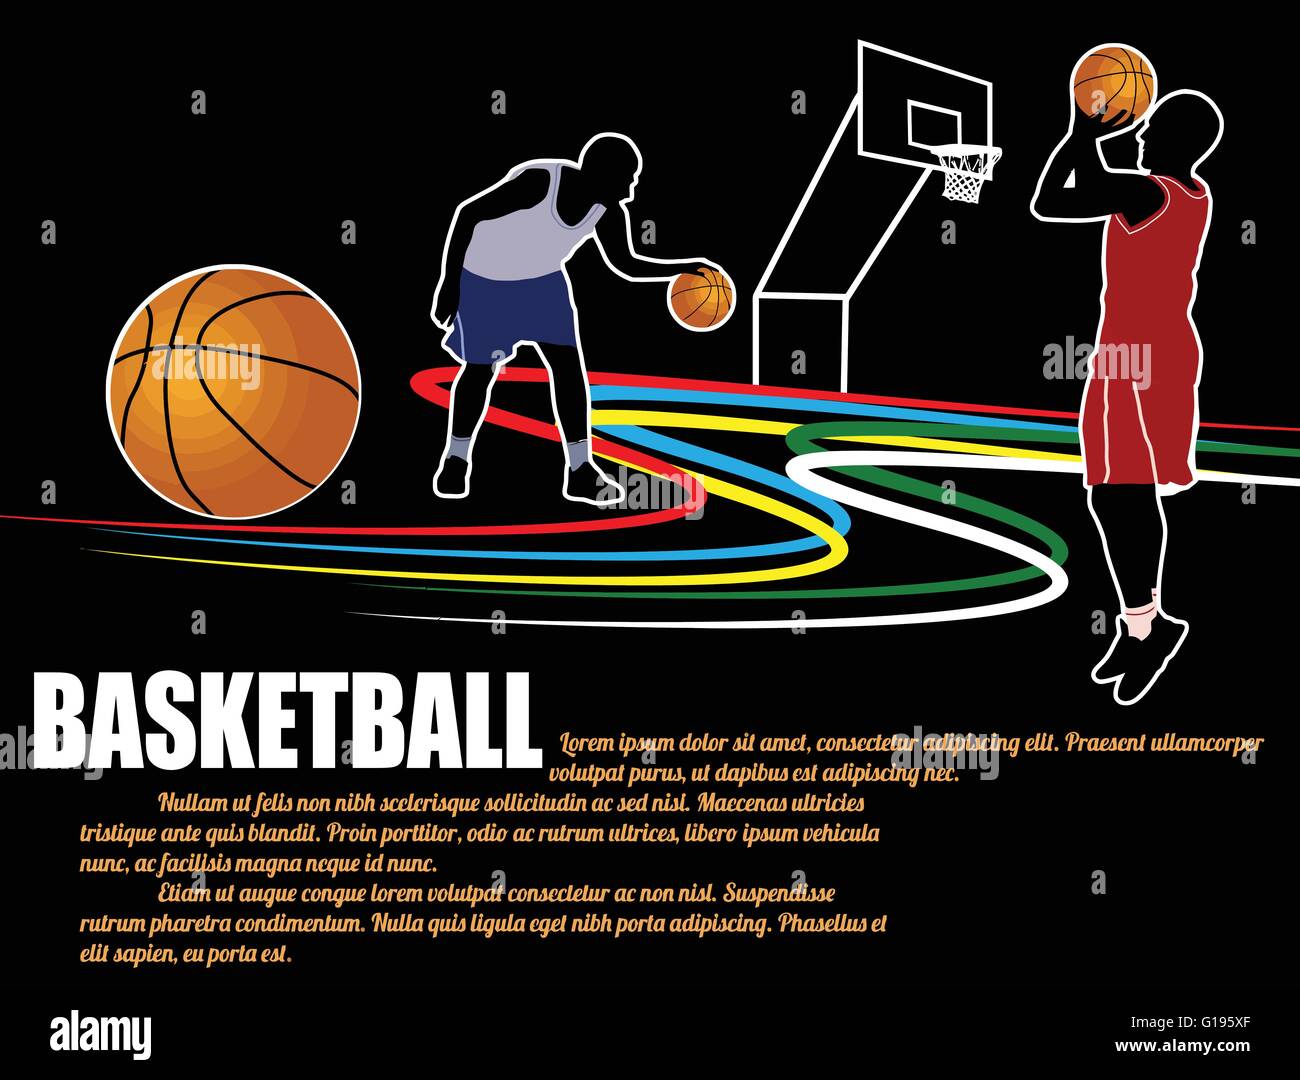 Basketball poster background with players silhouette on black, vector illustration Stock Vector